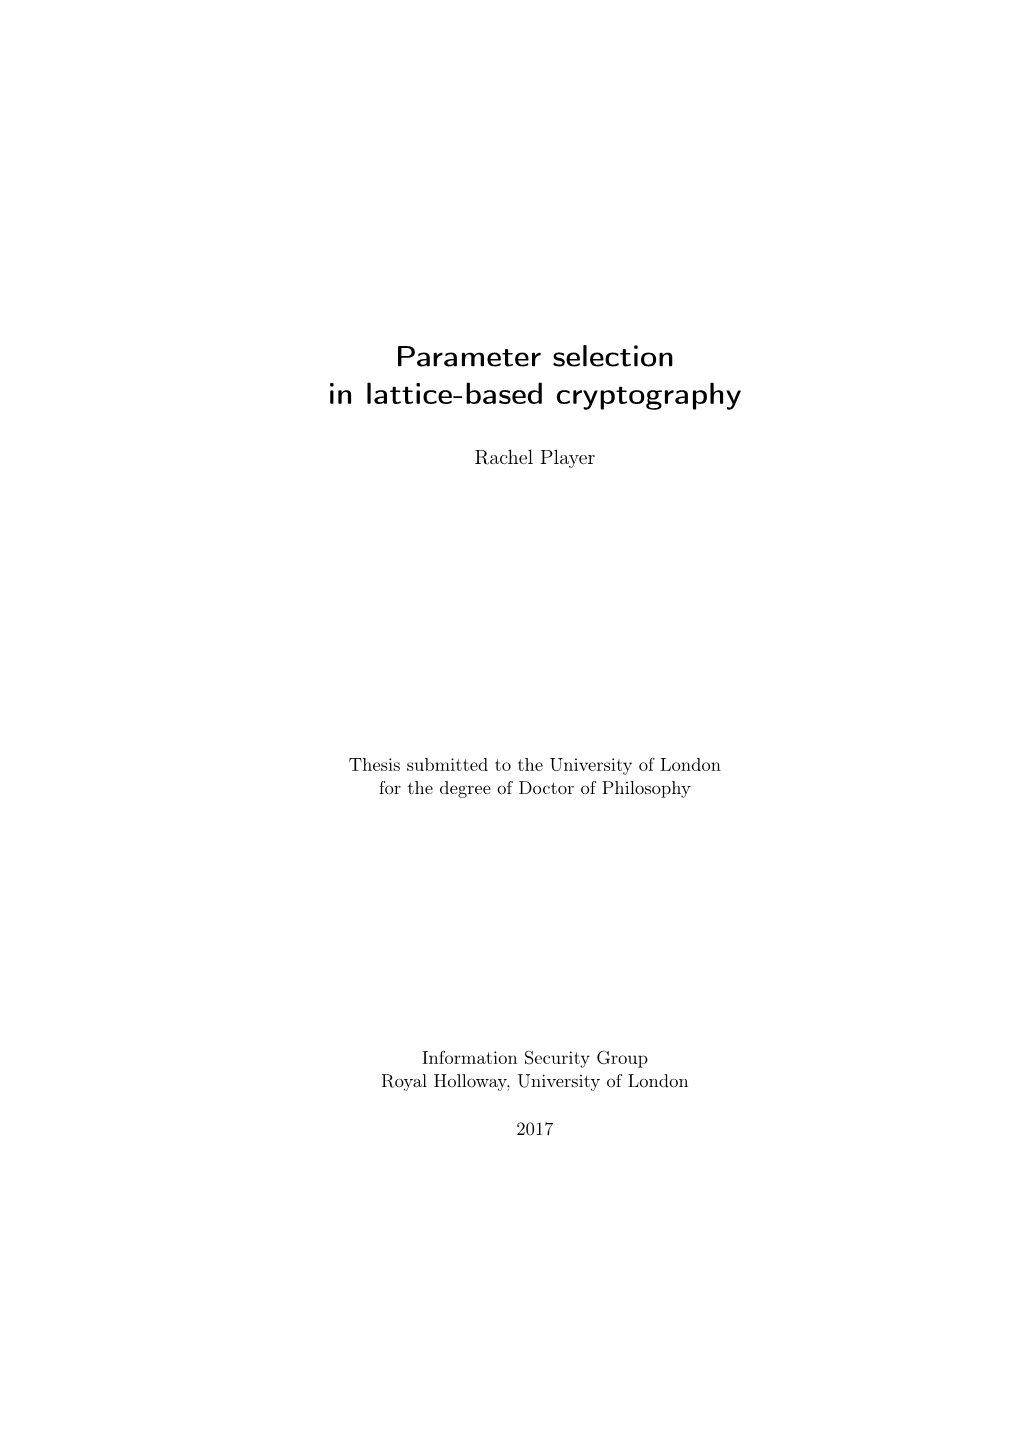 Parameter Selection in Lattice-Based Cryptography